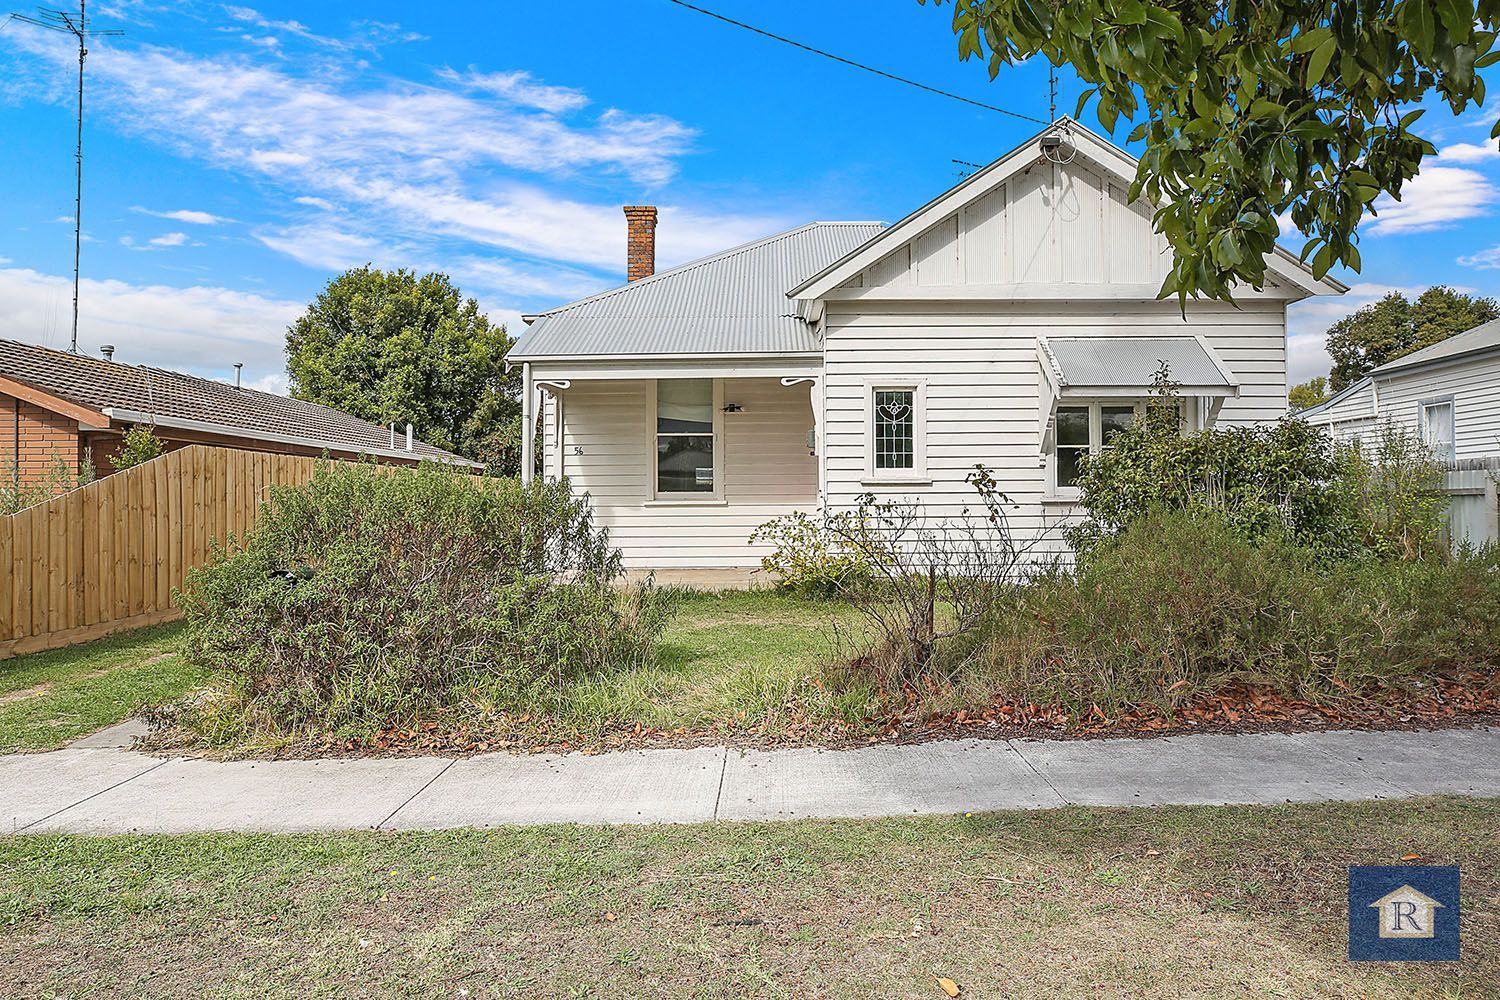 56 Pollack Street, Colac VIC 3250